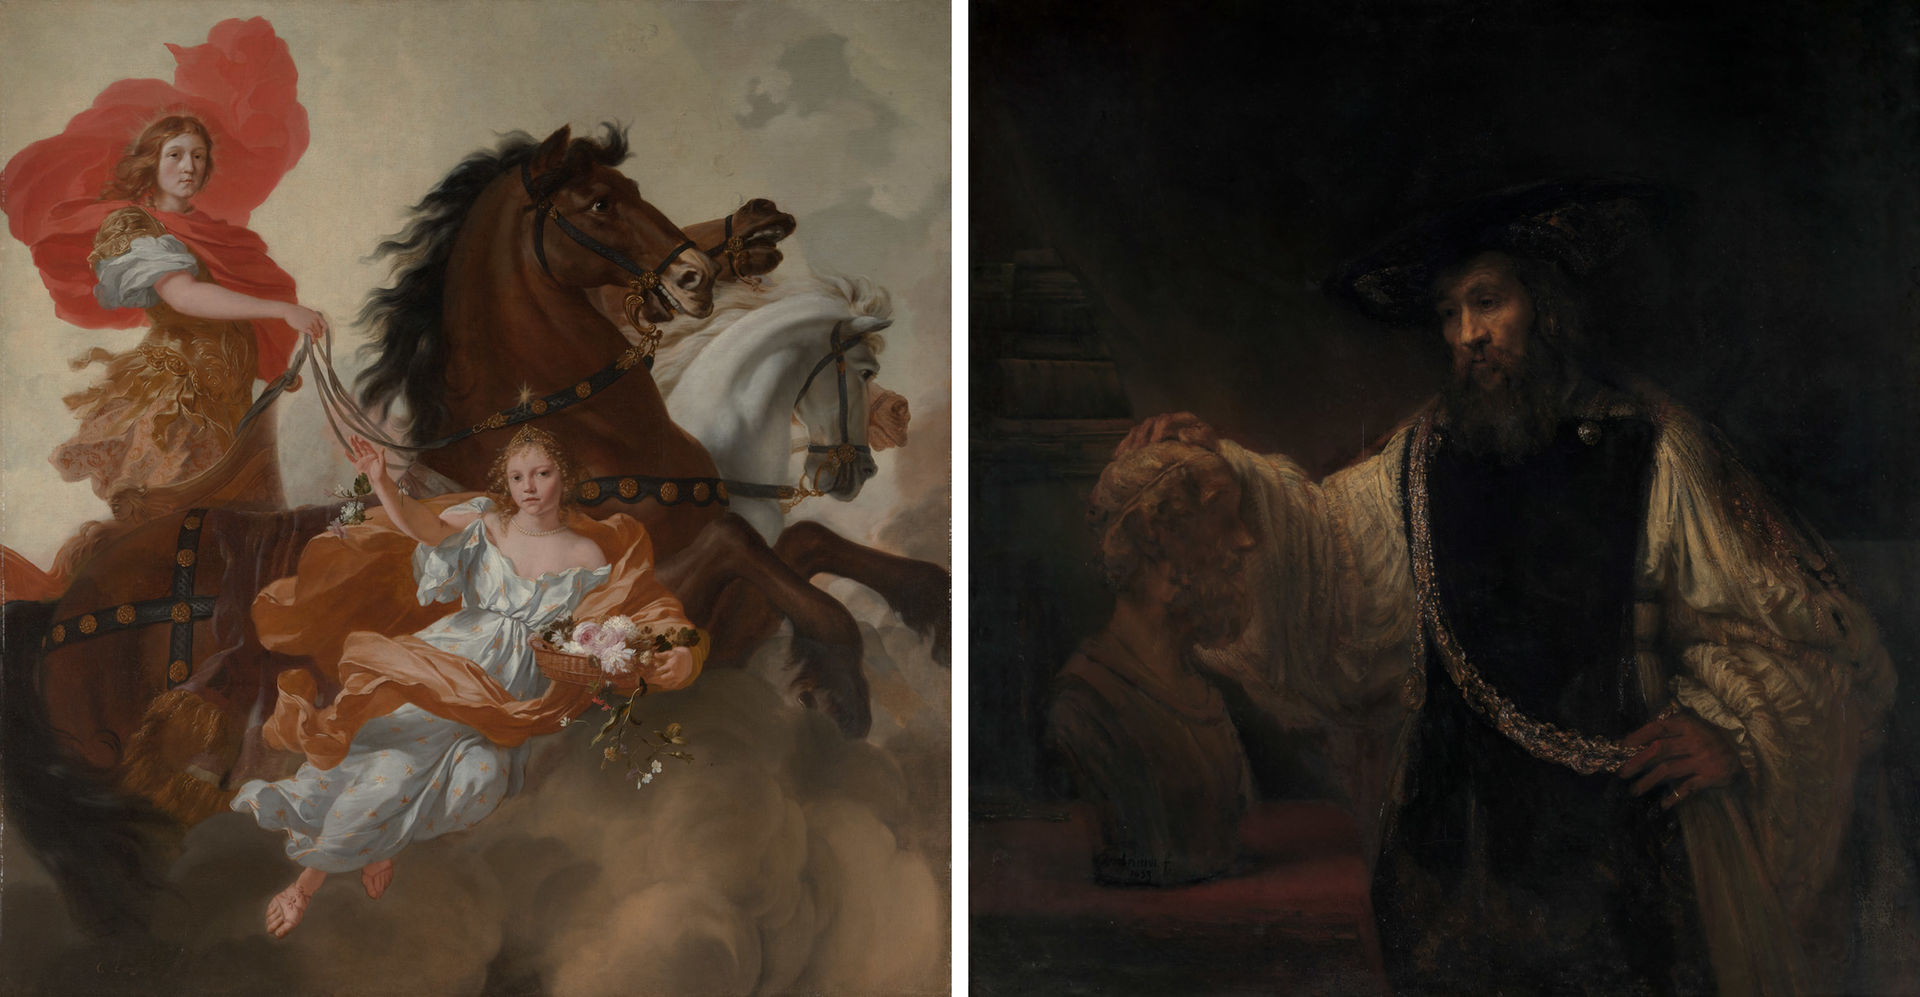 At left, a painting by Gerard de Lairesse depicting the gods Apollo and Aurora; at right, a meditative painting by Rembrandt of Artistotle contemplating a bust of Homer